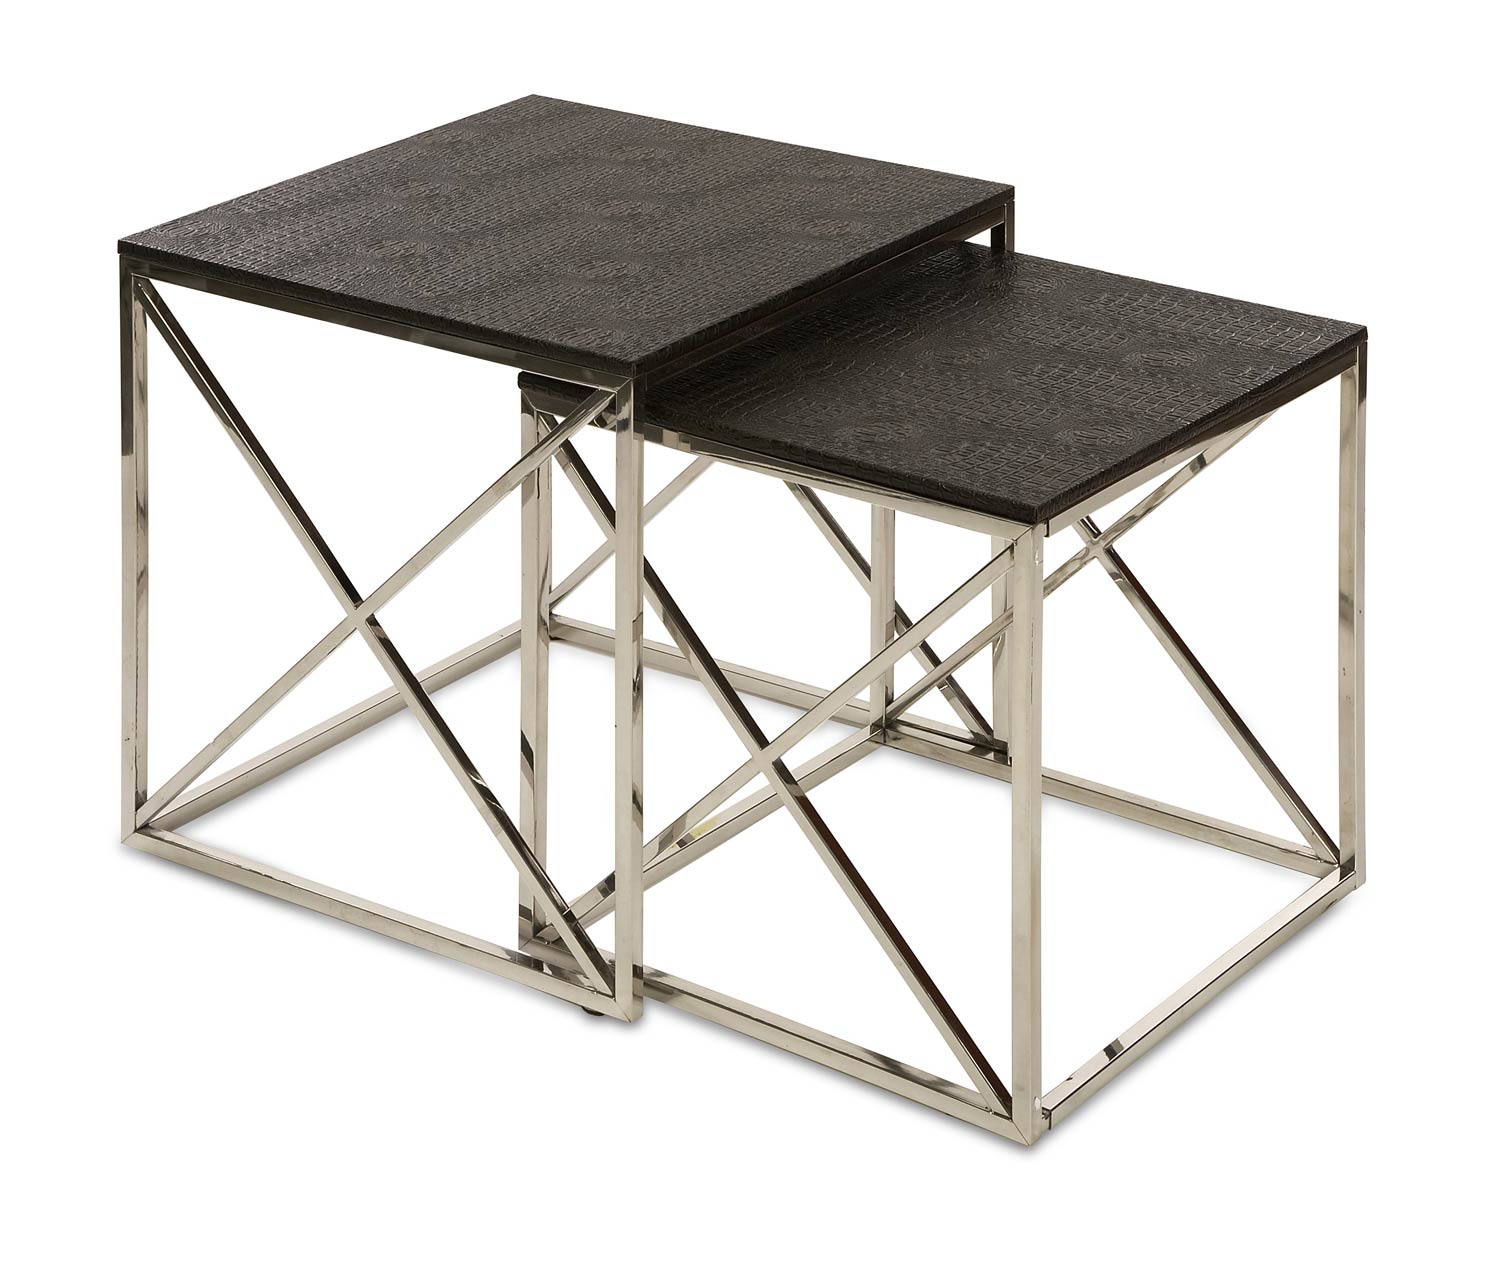 IMAX Armanie Stainless Steel Nesting Tables - Set of 2